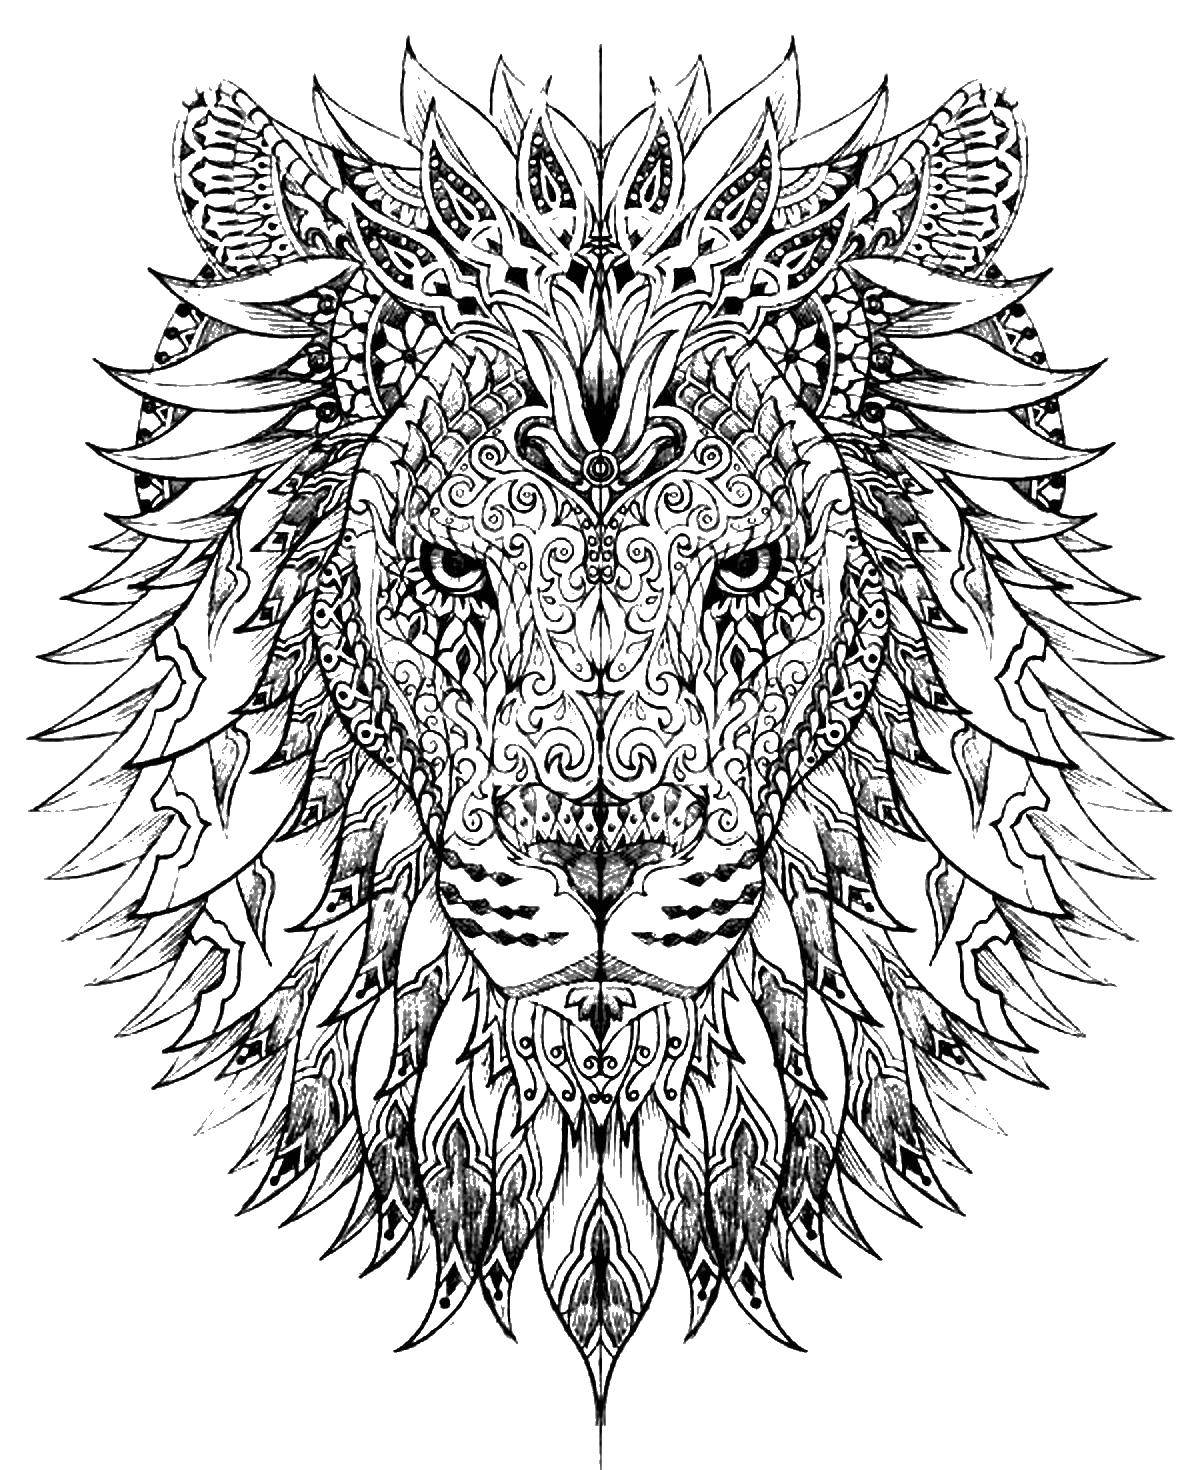 Coloring Patterned lion. Category patterns. Tags:  Patterns, animals, lion.